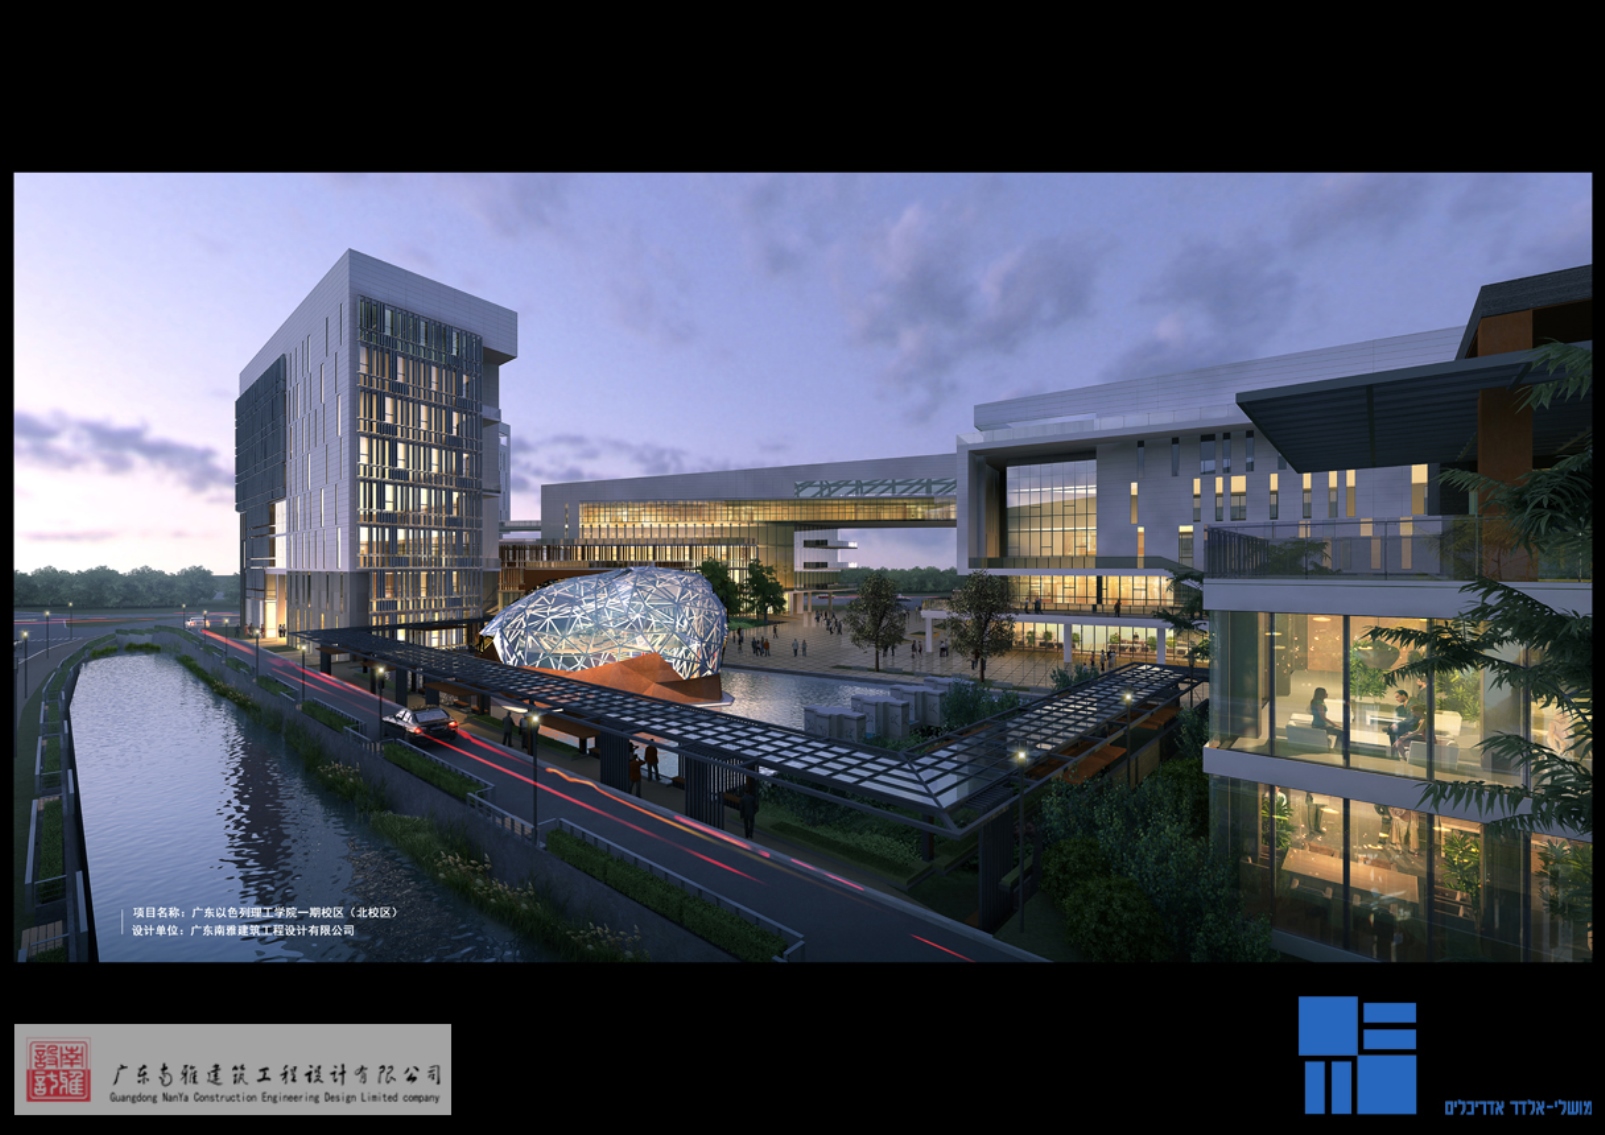 Architect’s rendering of the institute to open in 2016. Image courtesy of Guangdong Nan Ya Construction Engineering Design and Mochly-Eldar Architects